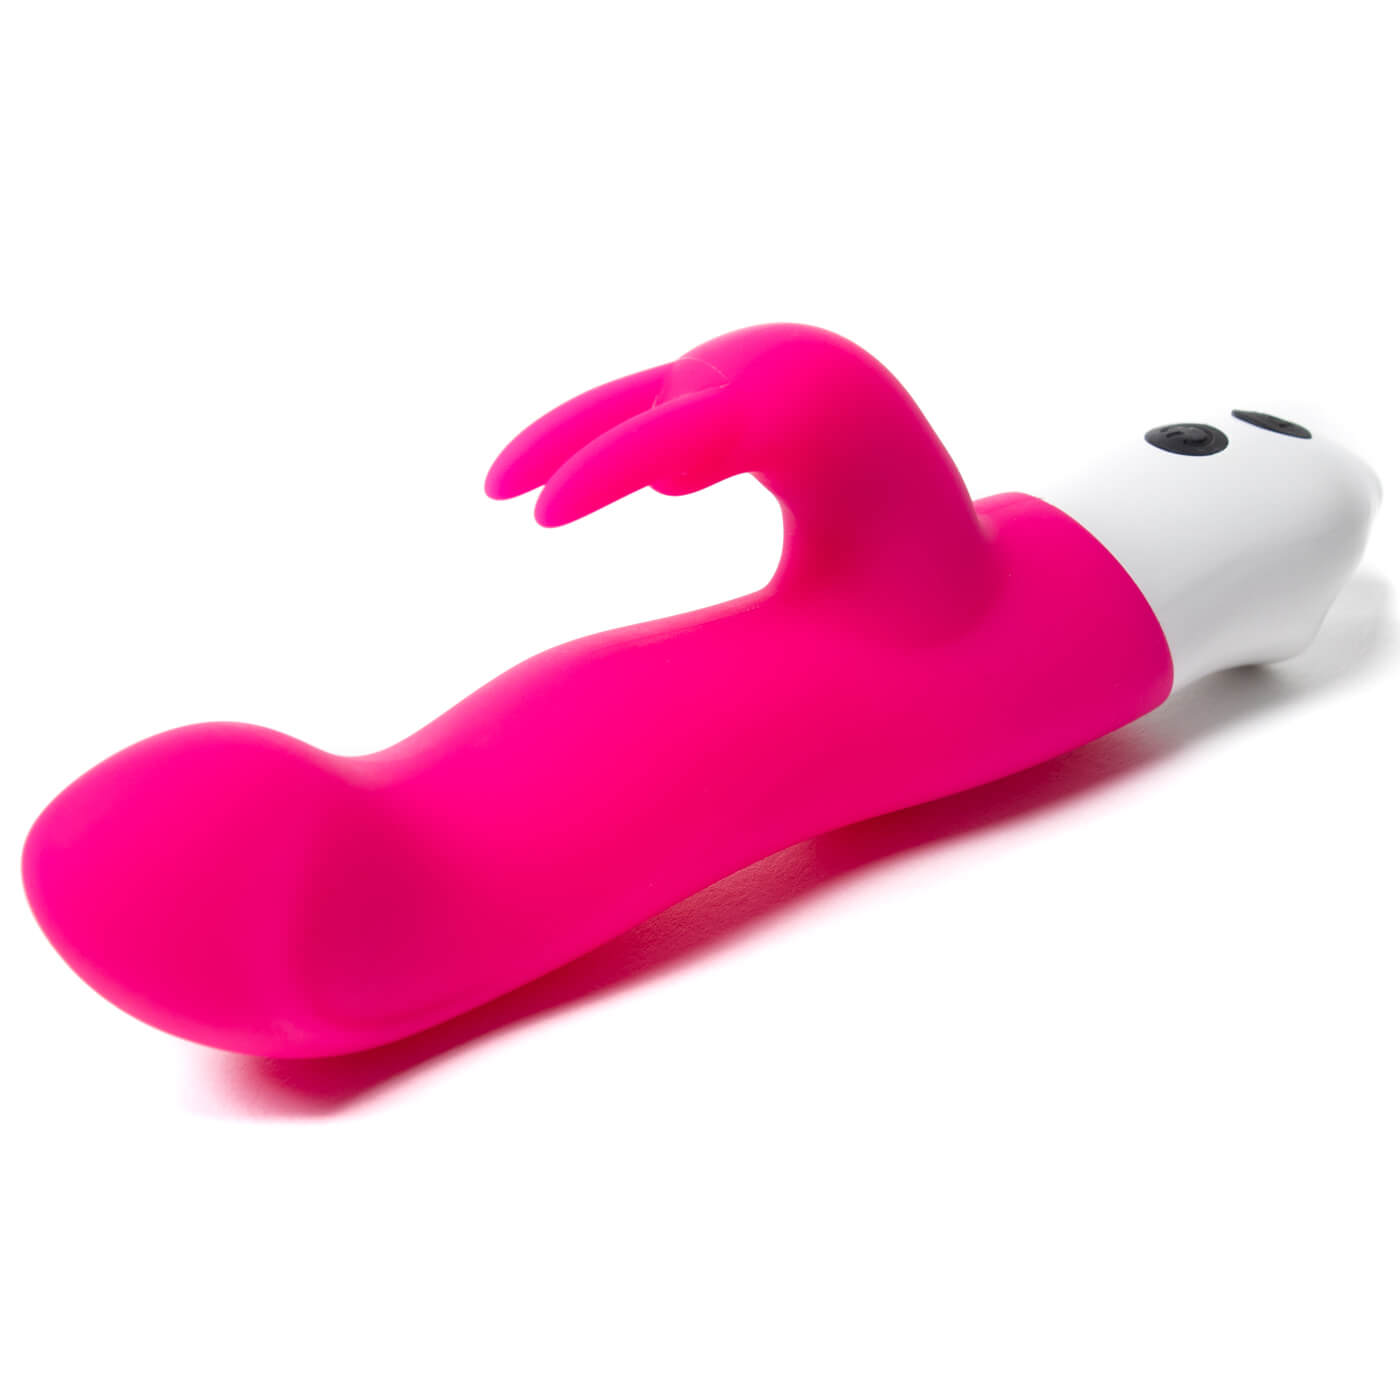 DUALITY Dual Motor Rechargeable 7 Mode Extra Powerful Tapered G-Spot Rabbit Vibrator